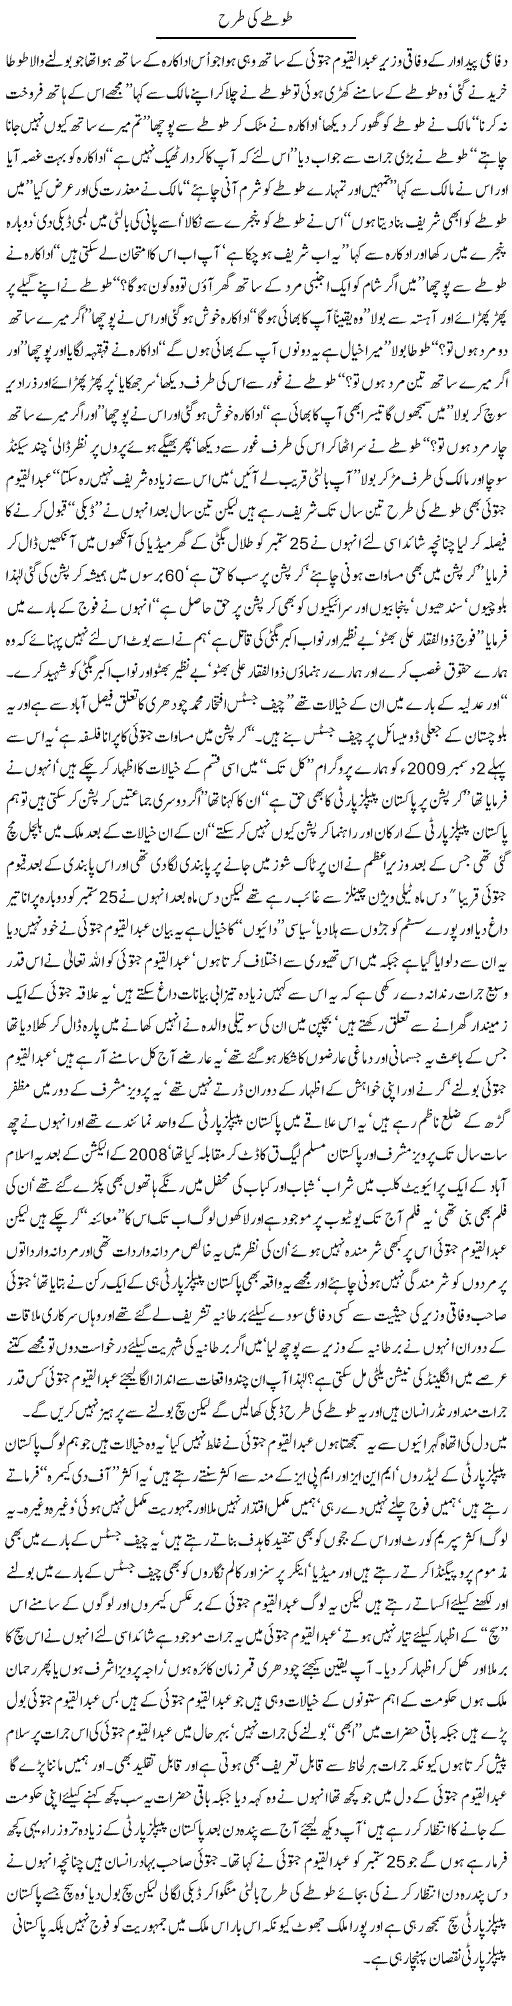 Like Parrot Express Column Javed Chaudhry 28 September 2010